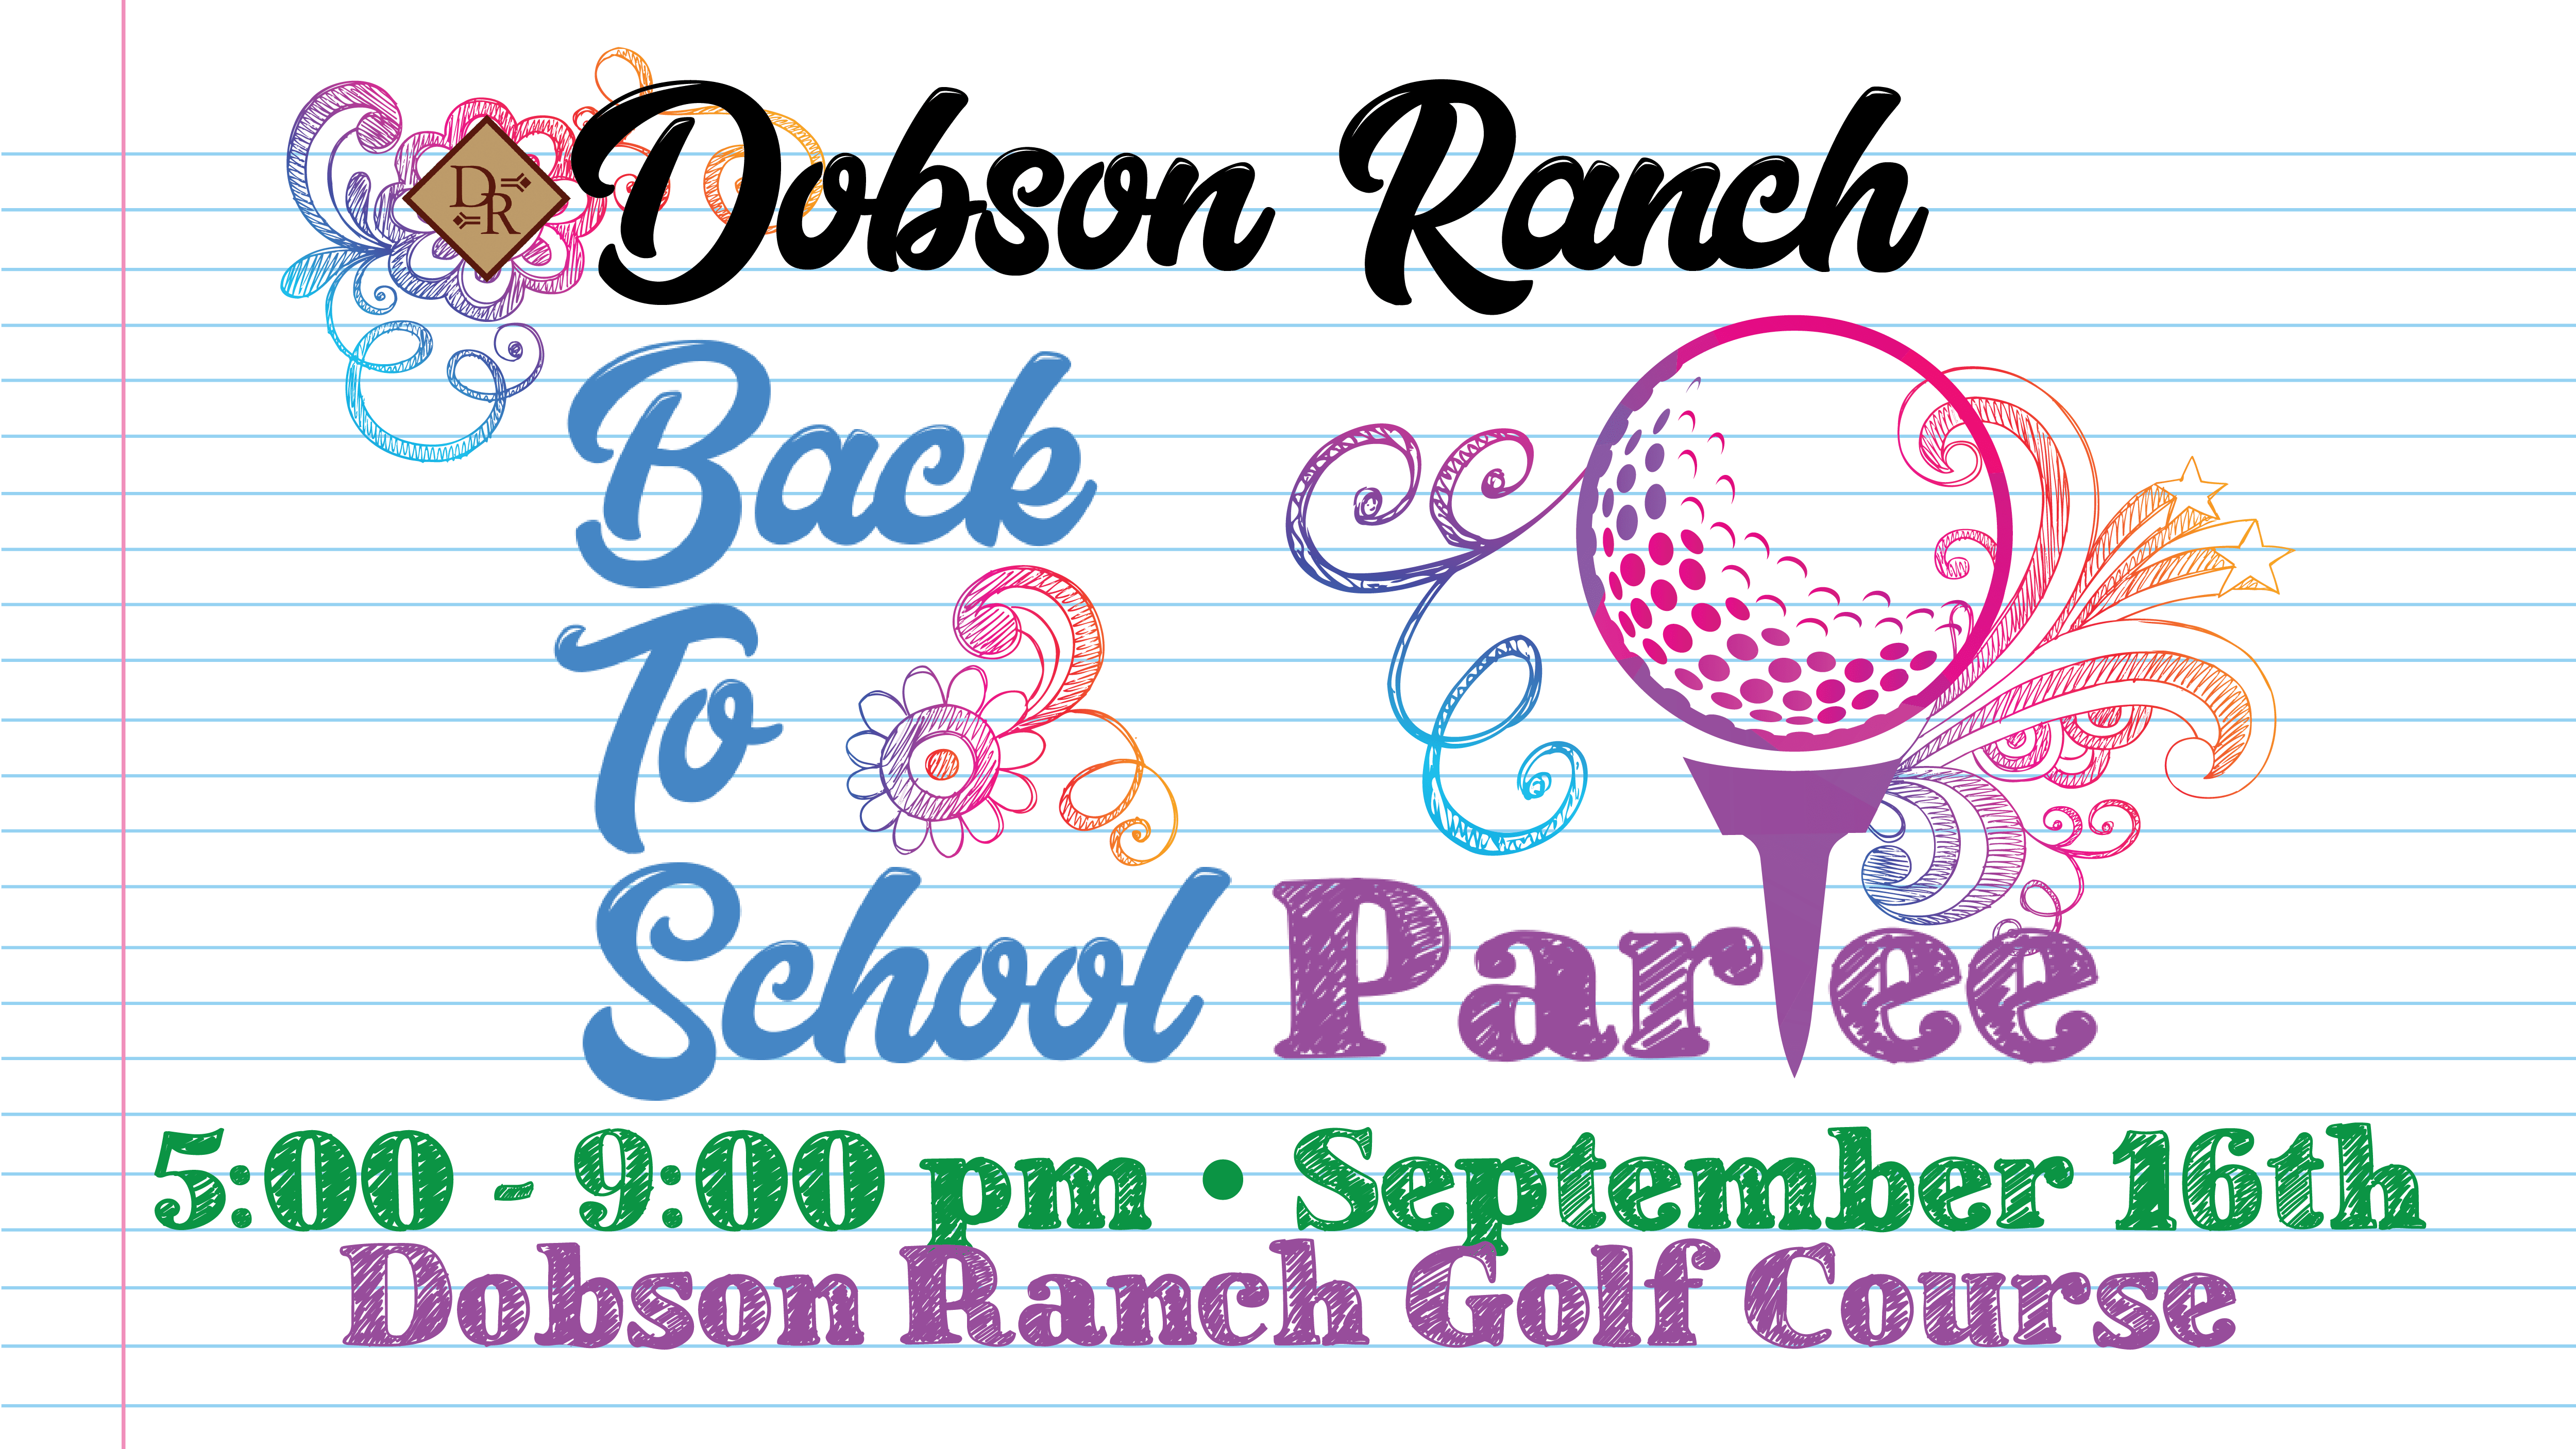 Back to School Partee @ Dobson Ranch Golf Course